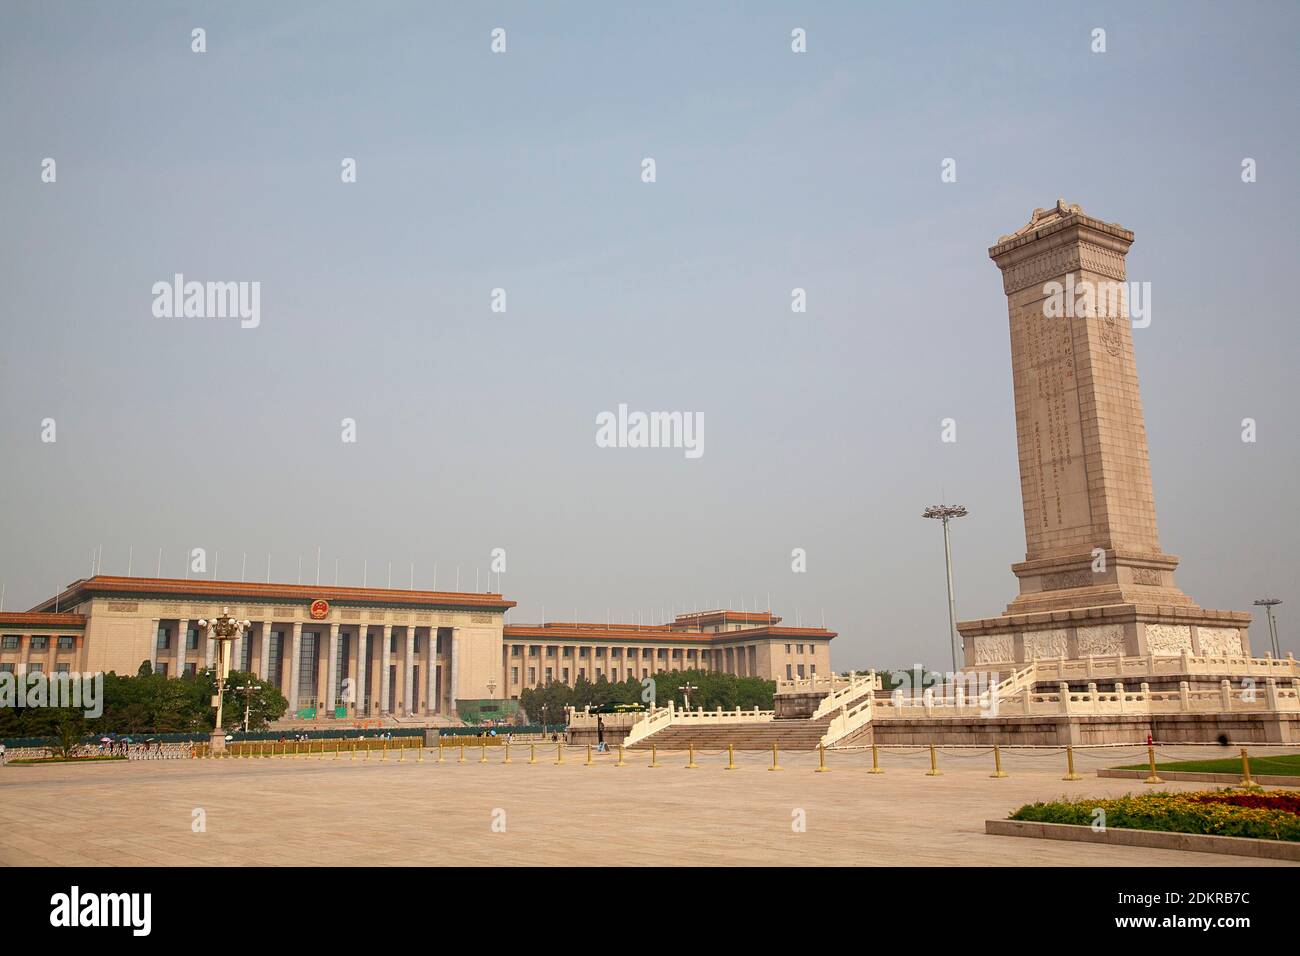 Monument to the People's Heroes with Great Hall of the People in background in Tiananmen Square or Tian'anmen Square Stock Photo